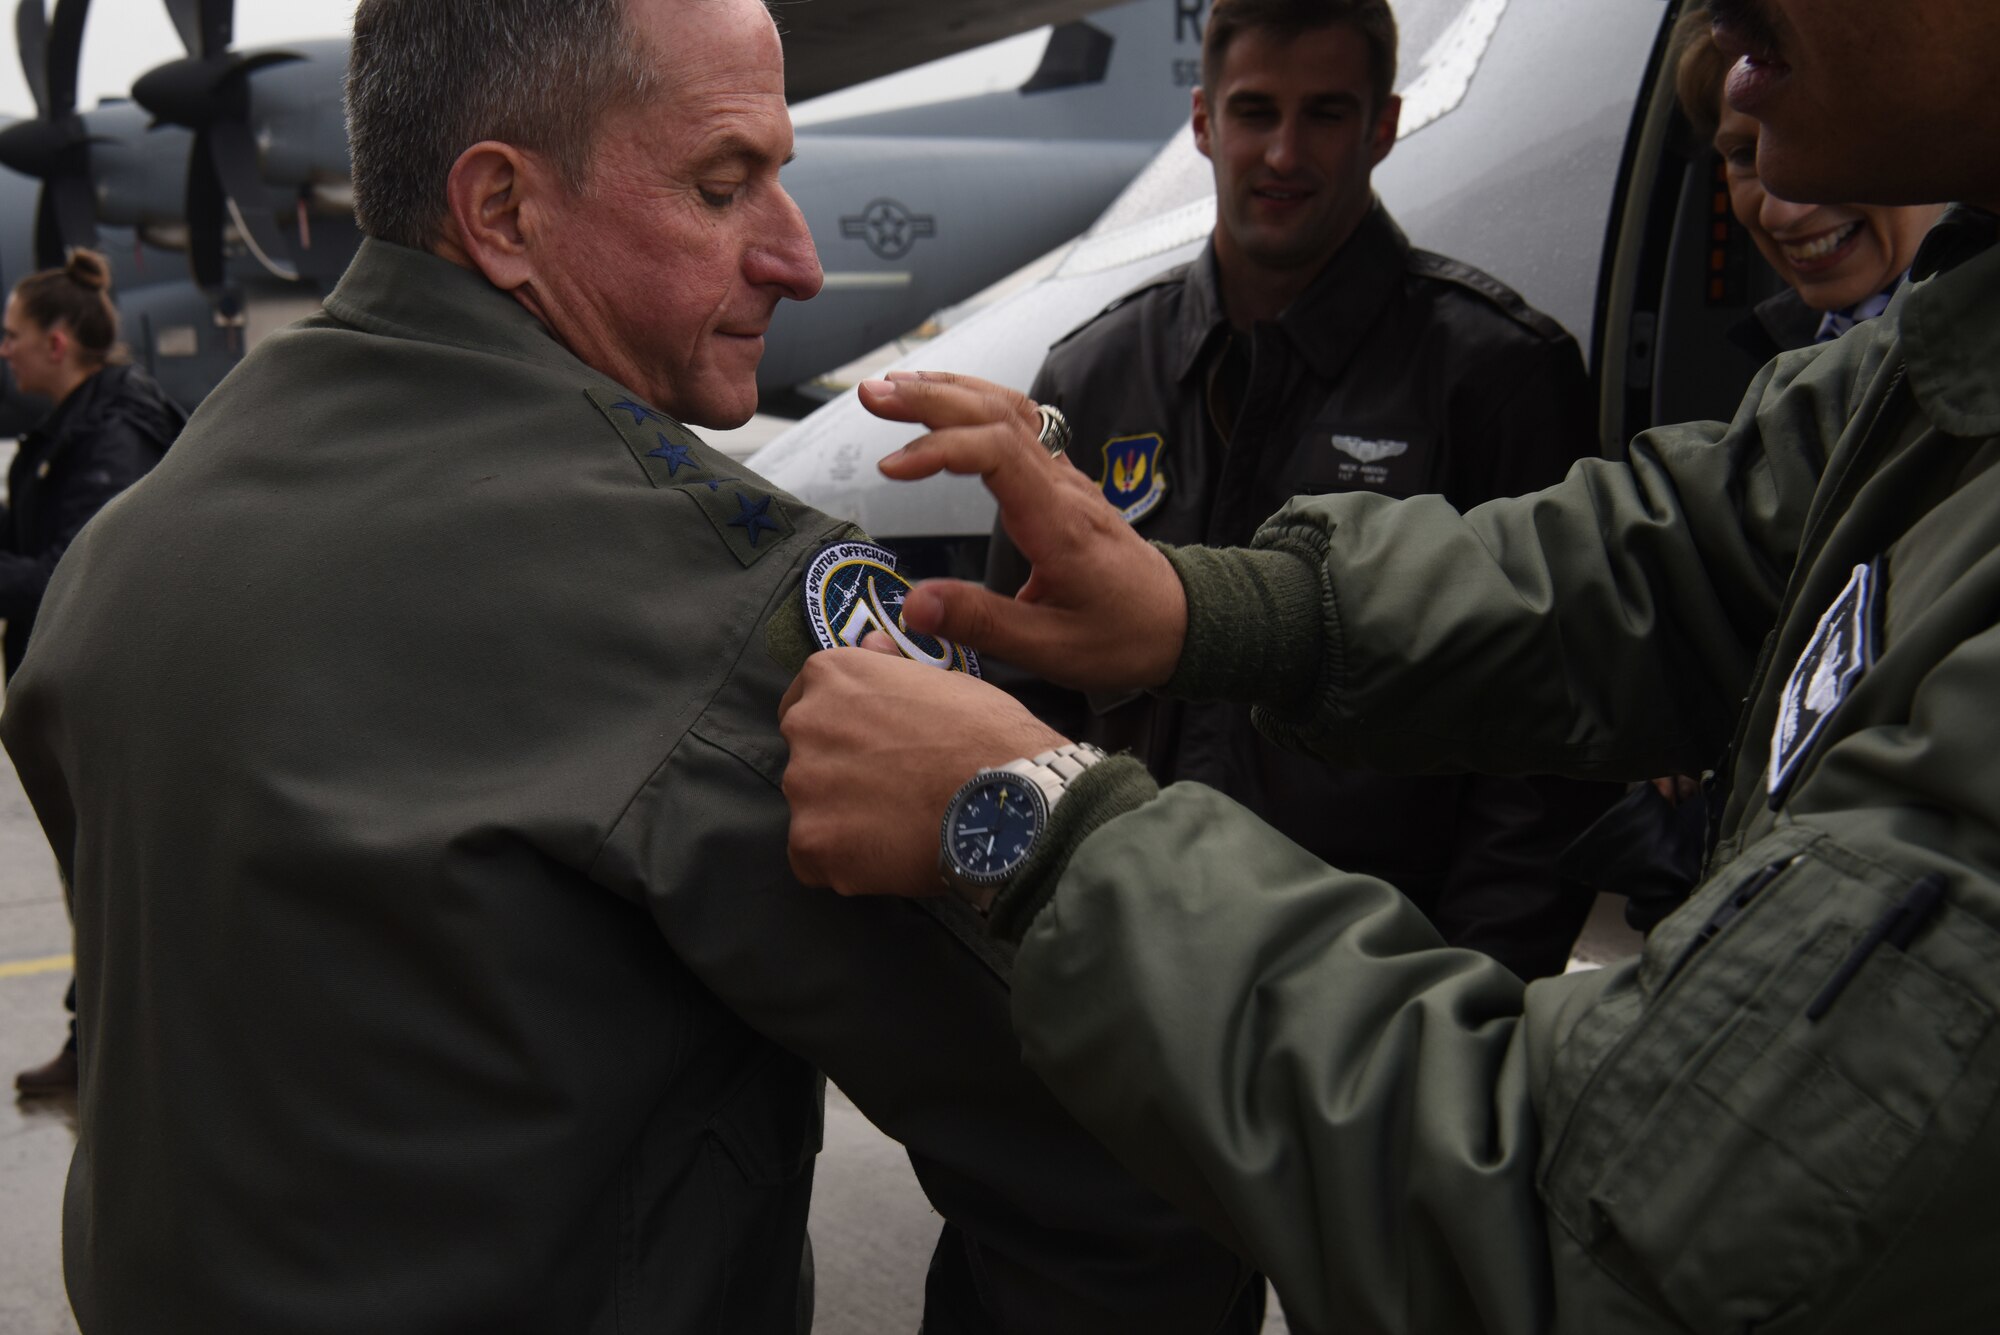 A member of the 86th Aeromedical Evacuation Squadron places a squadron patch on Air Force Chief of Staff Gen. David L. Goldfein after a capabilities brief on Ramstein Air Base, Germany, Nov. 22, 2019.